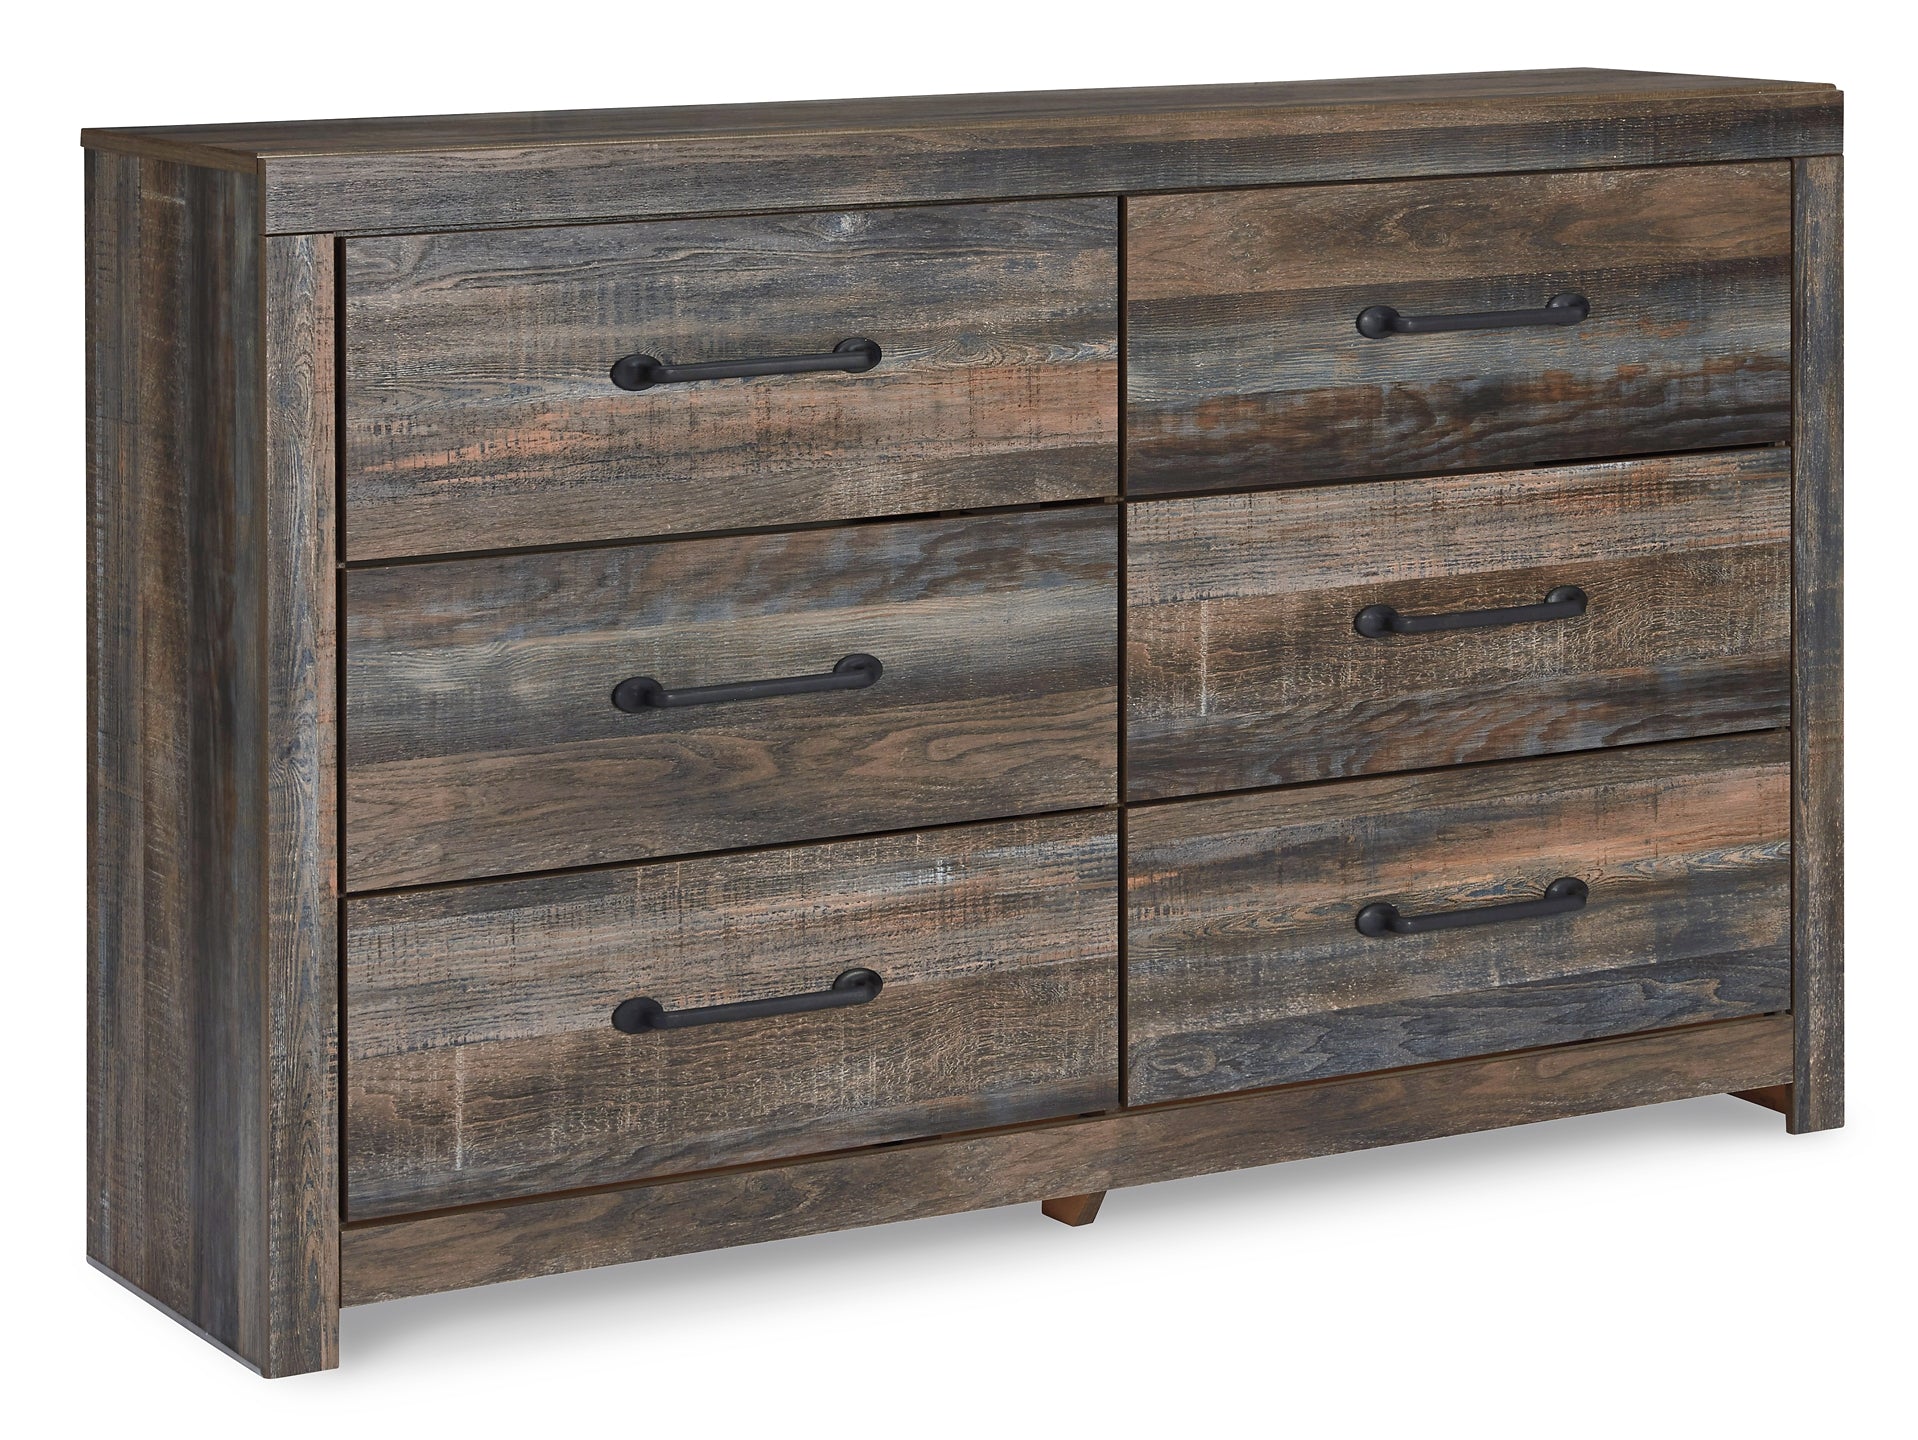 Drystan Queen Panel Bed with Dresser Signature Design by Ashley®